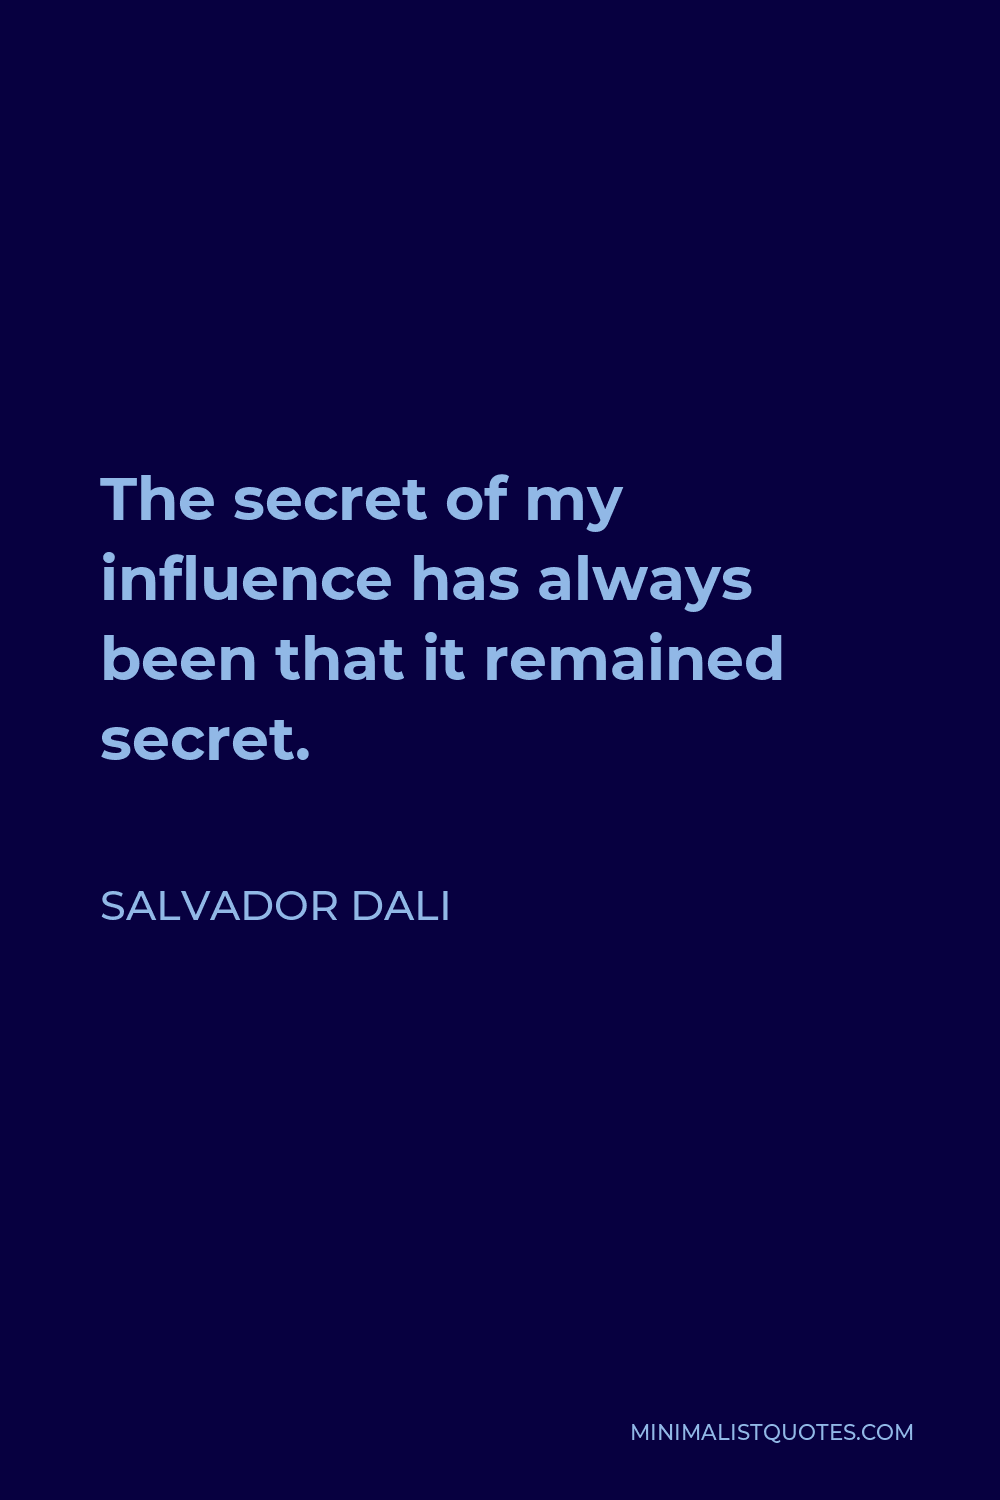 Salvador Dali Quote - The secret of my influence has always been that it remained secret.